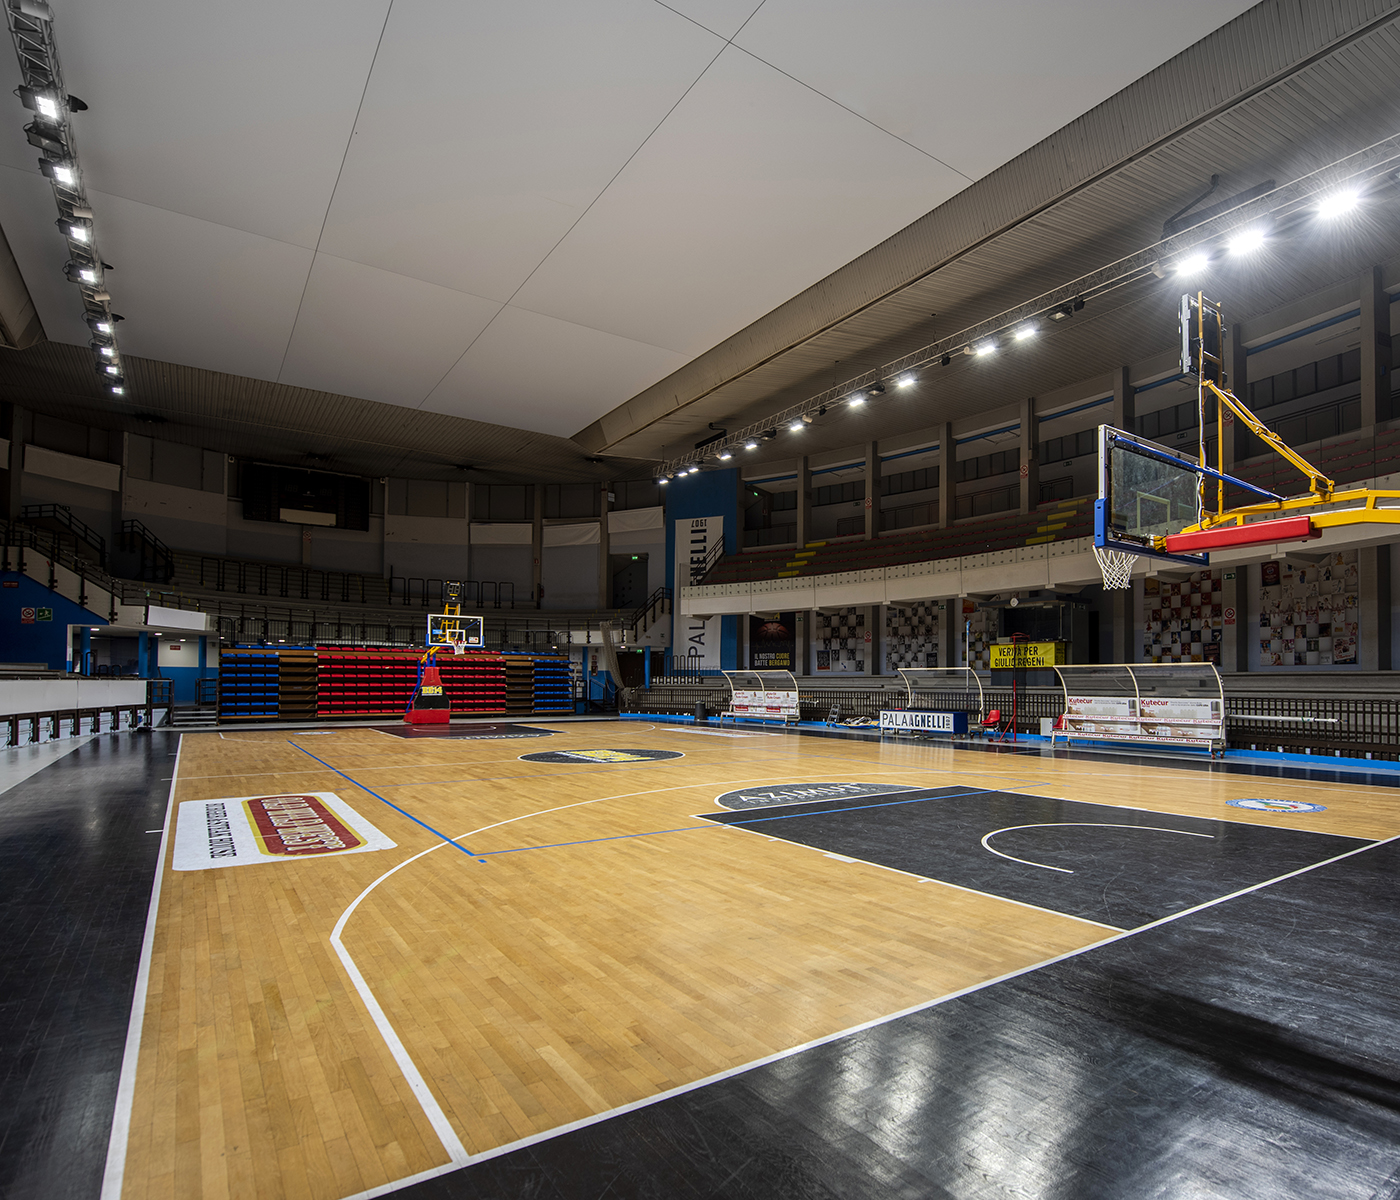 PalaAgnelli indoor sports facility